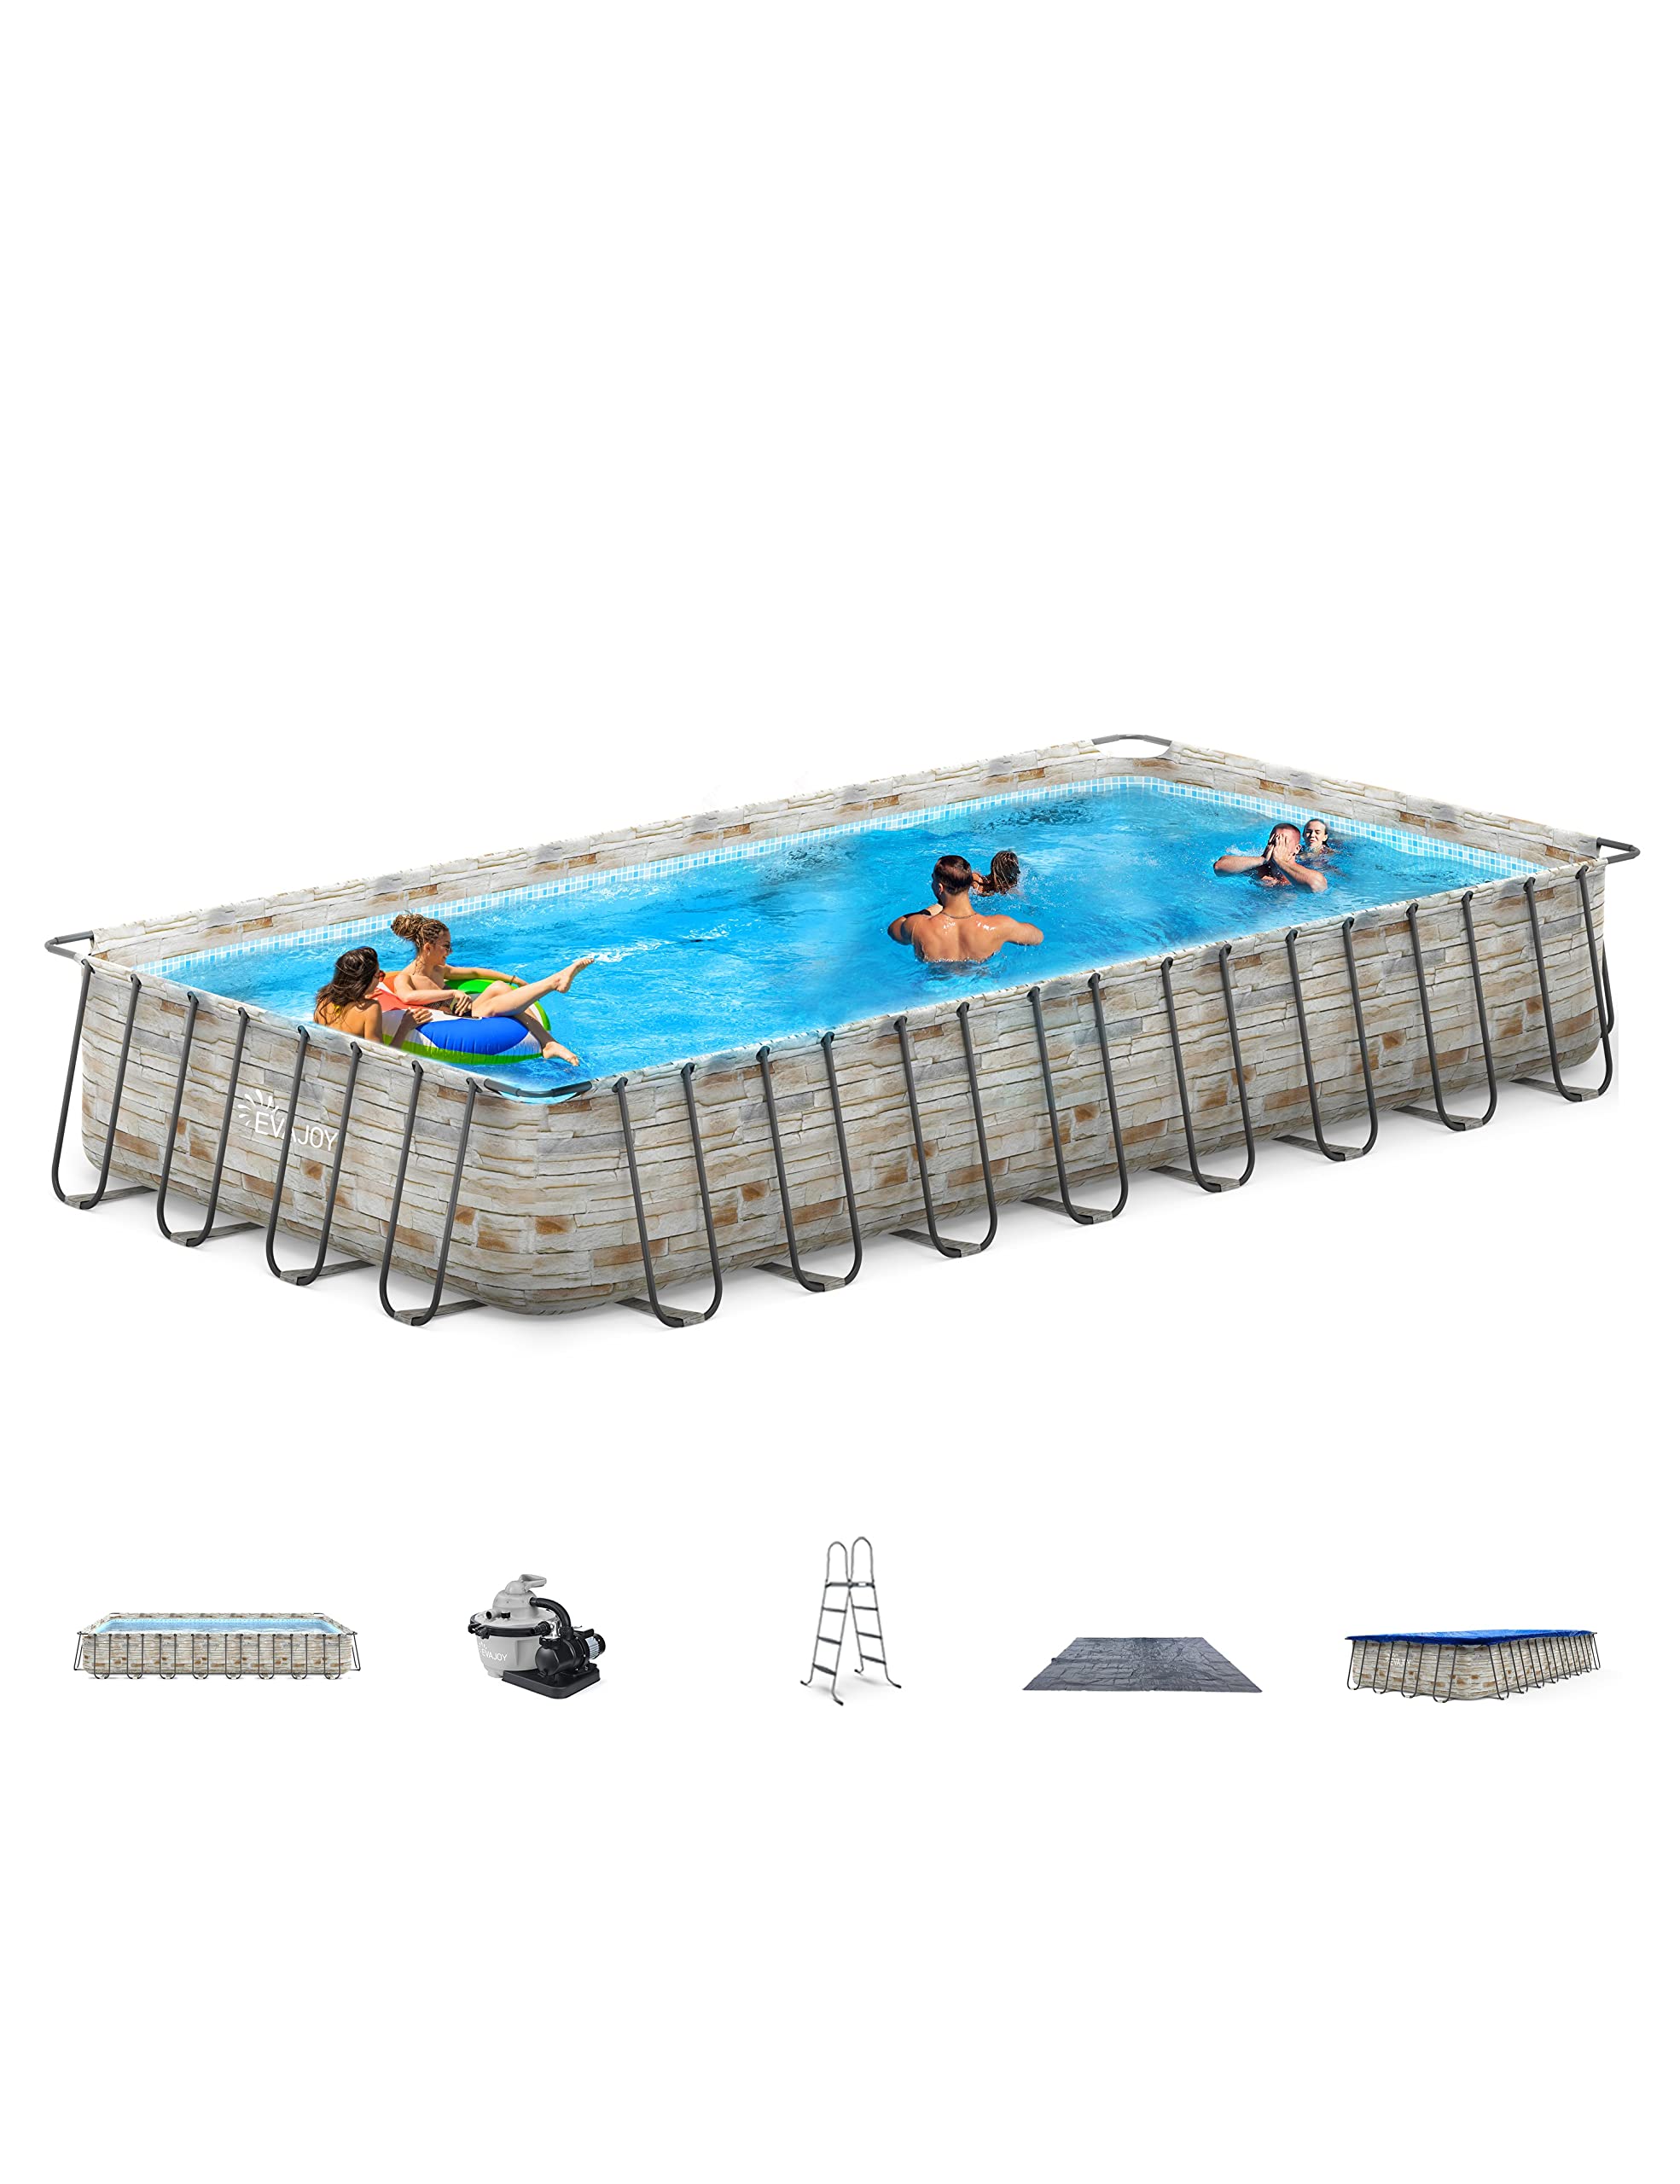 EVAJOY 32ft x 16ft x 52in Metal Frame Swimming Pool Set, Rectangular Above Ground Pool Cover with Sand Filter Pump, Pool Ladder, Ground Cloth for Backyard, Garden, PVC, Blue